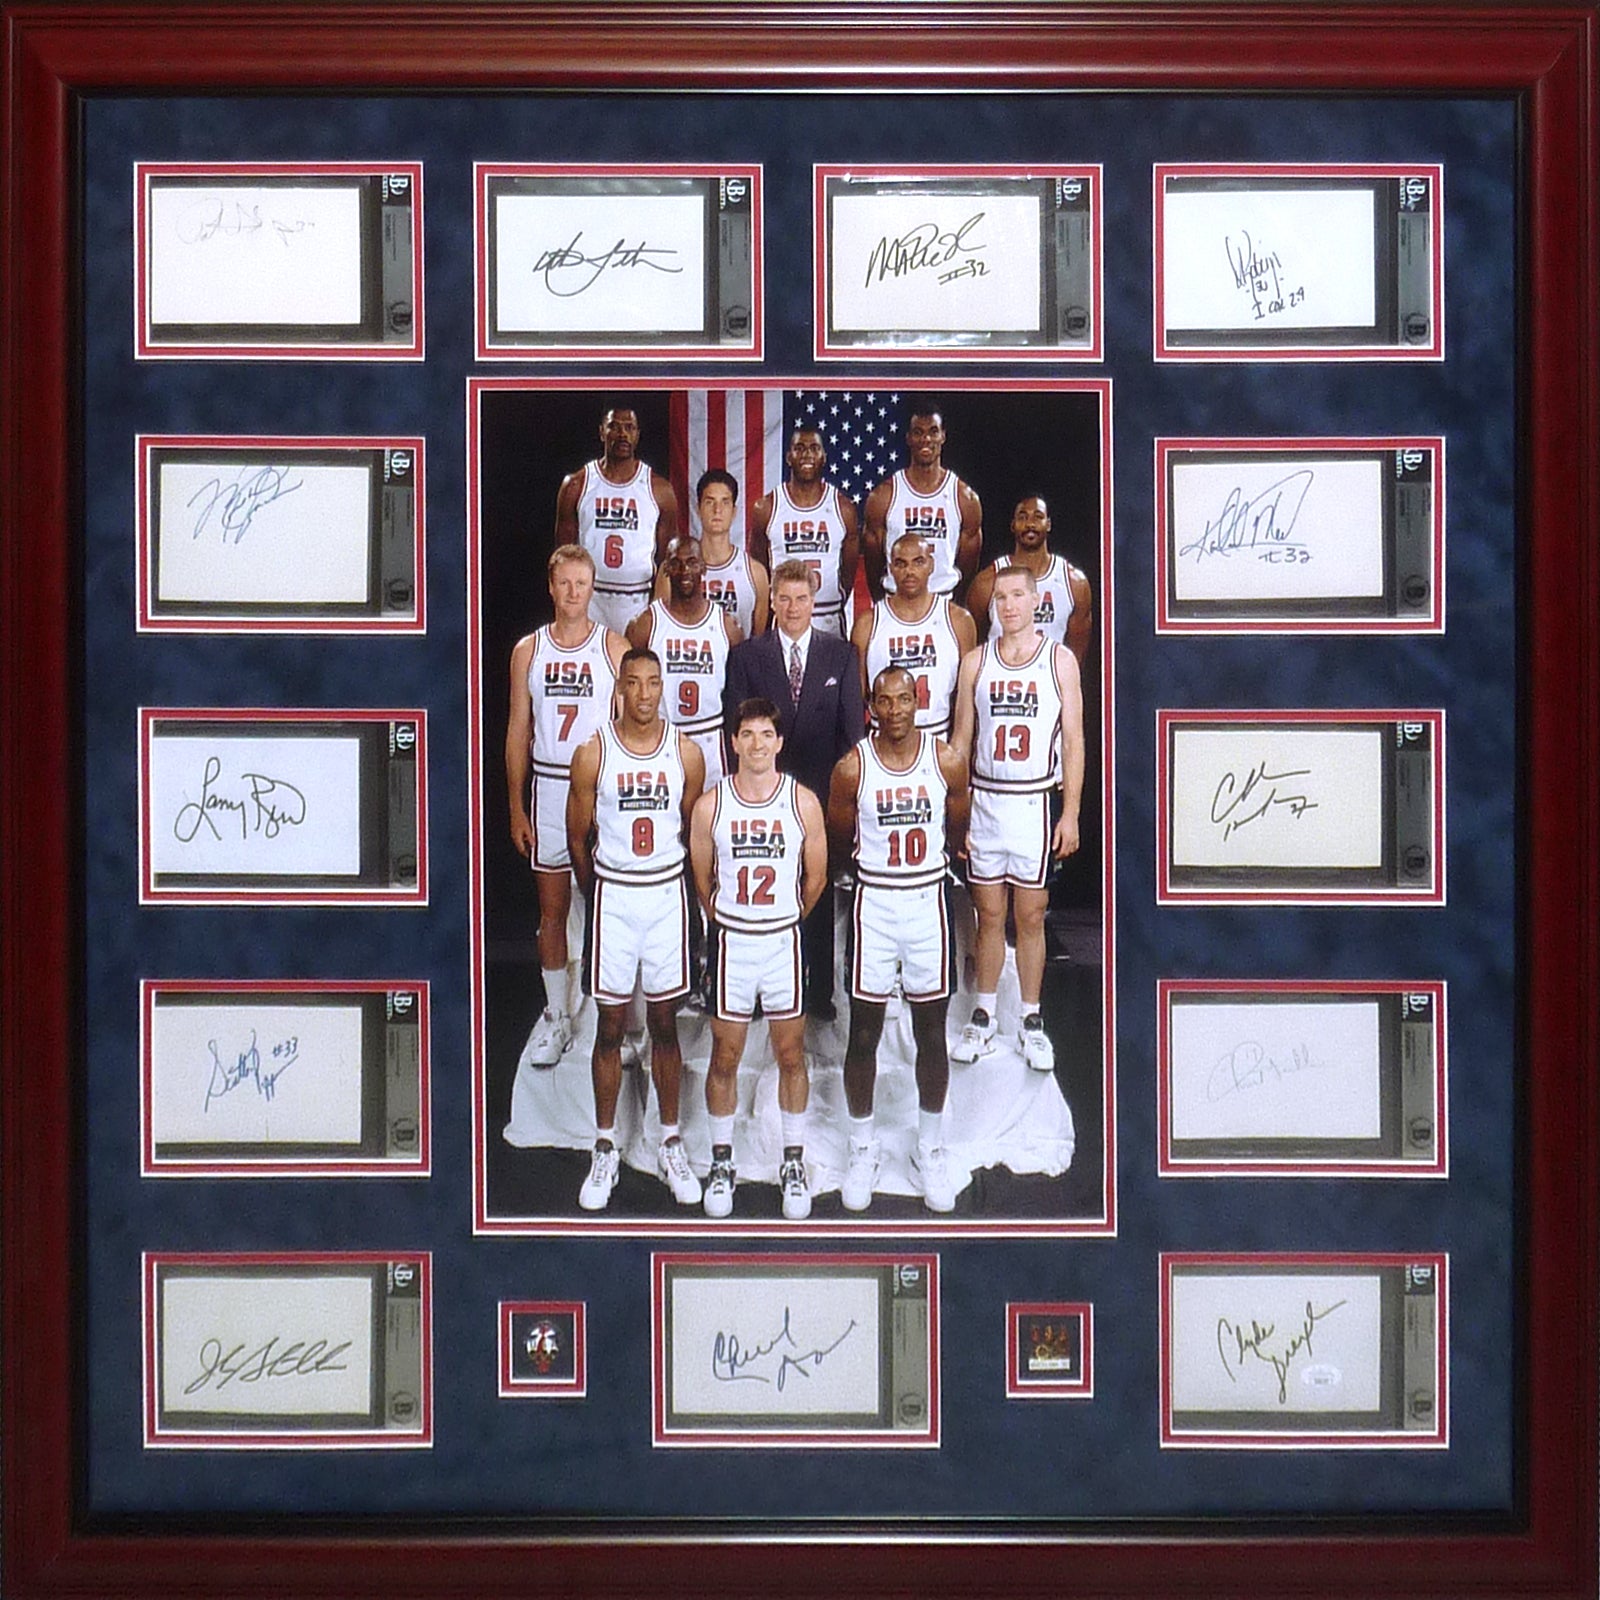 DREAM TEAM Autographed 1992 Barcelona Olympics USA Basketball Deluxe Framed Index Card Piece with 16x20 Photo - Coach Daly and 12 Members - JSA